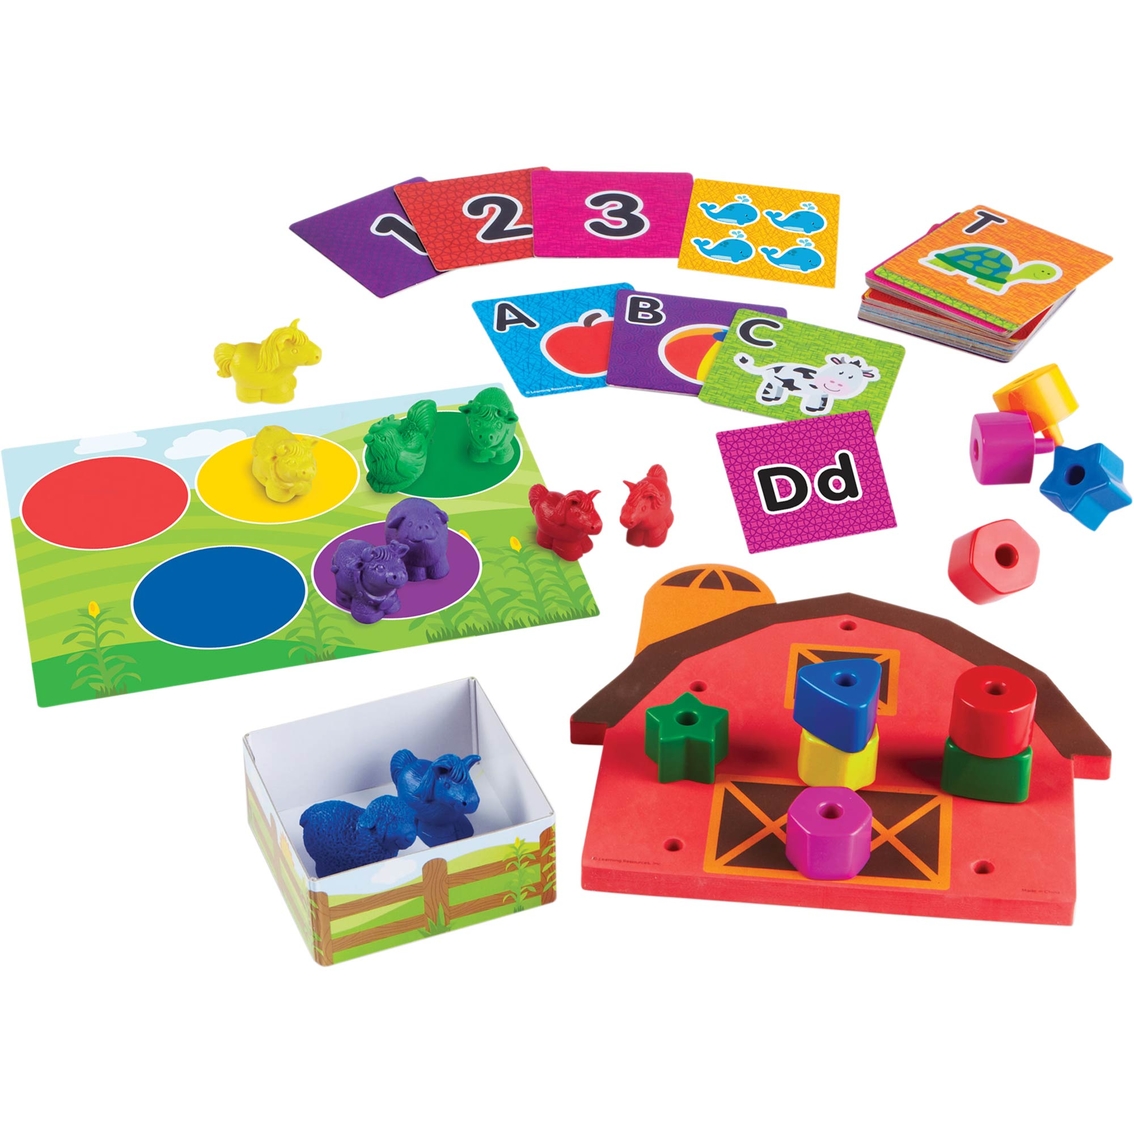 Learning Resources All Ready for Toddler Time Readiness Kit - Image 2 of 3